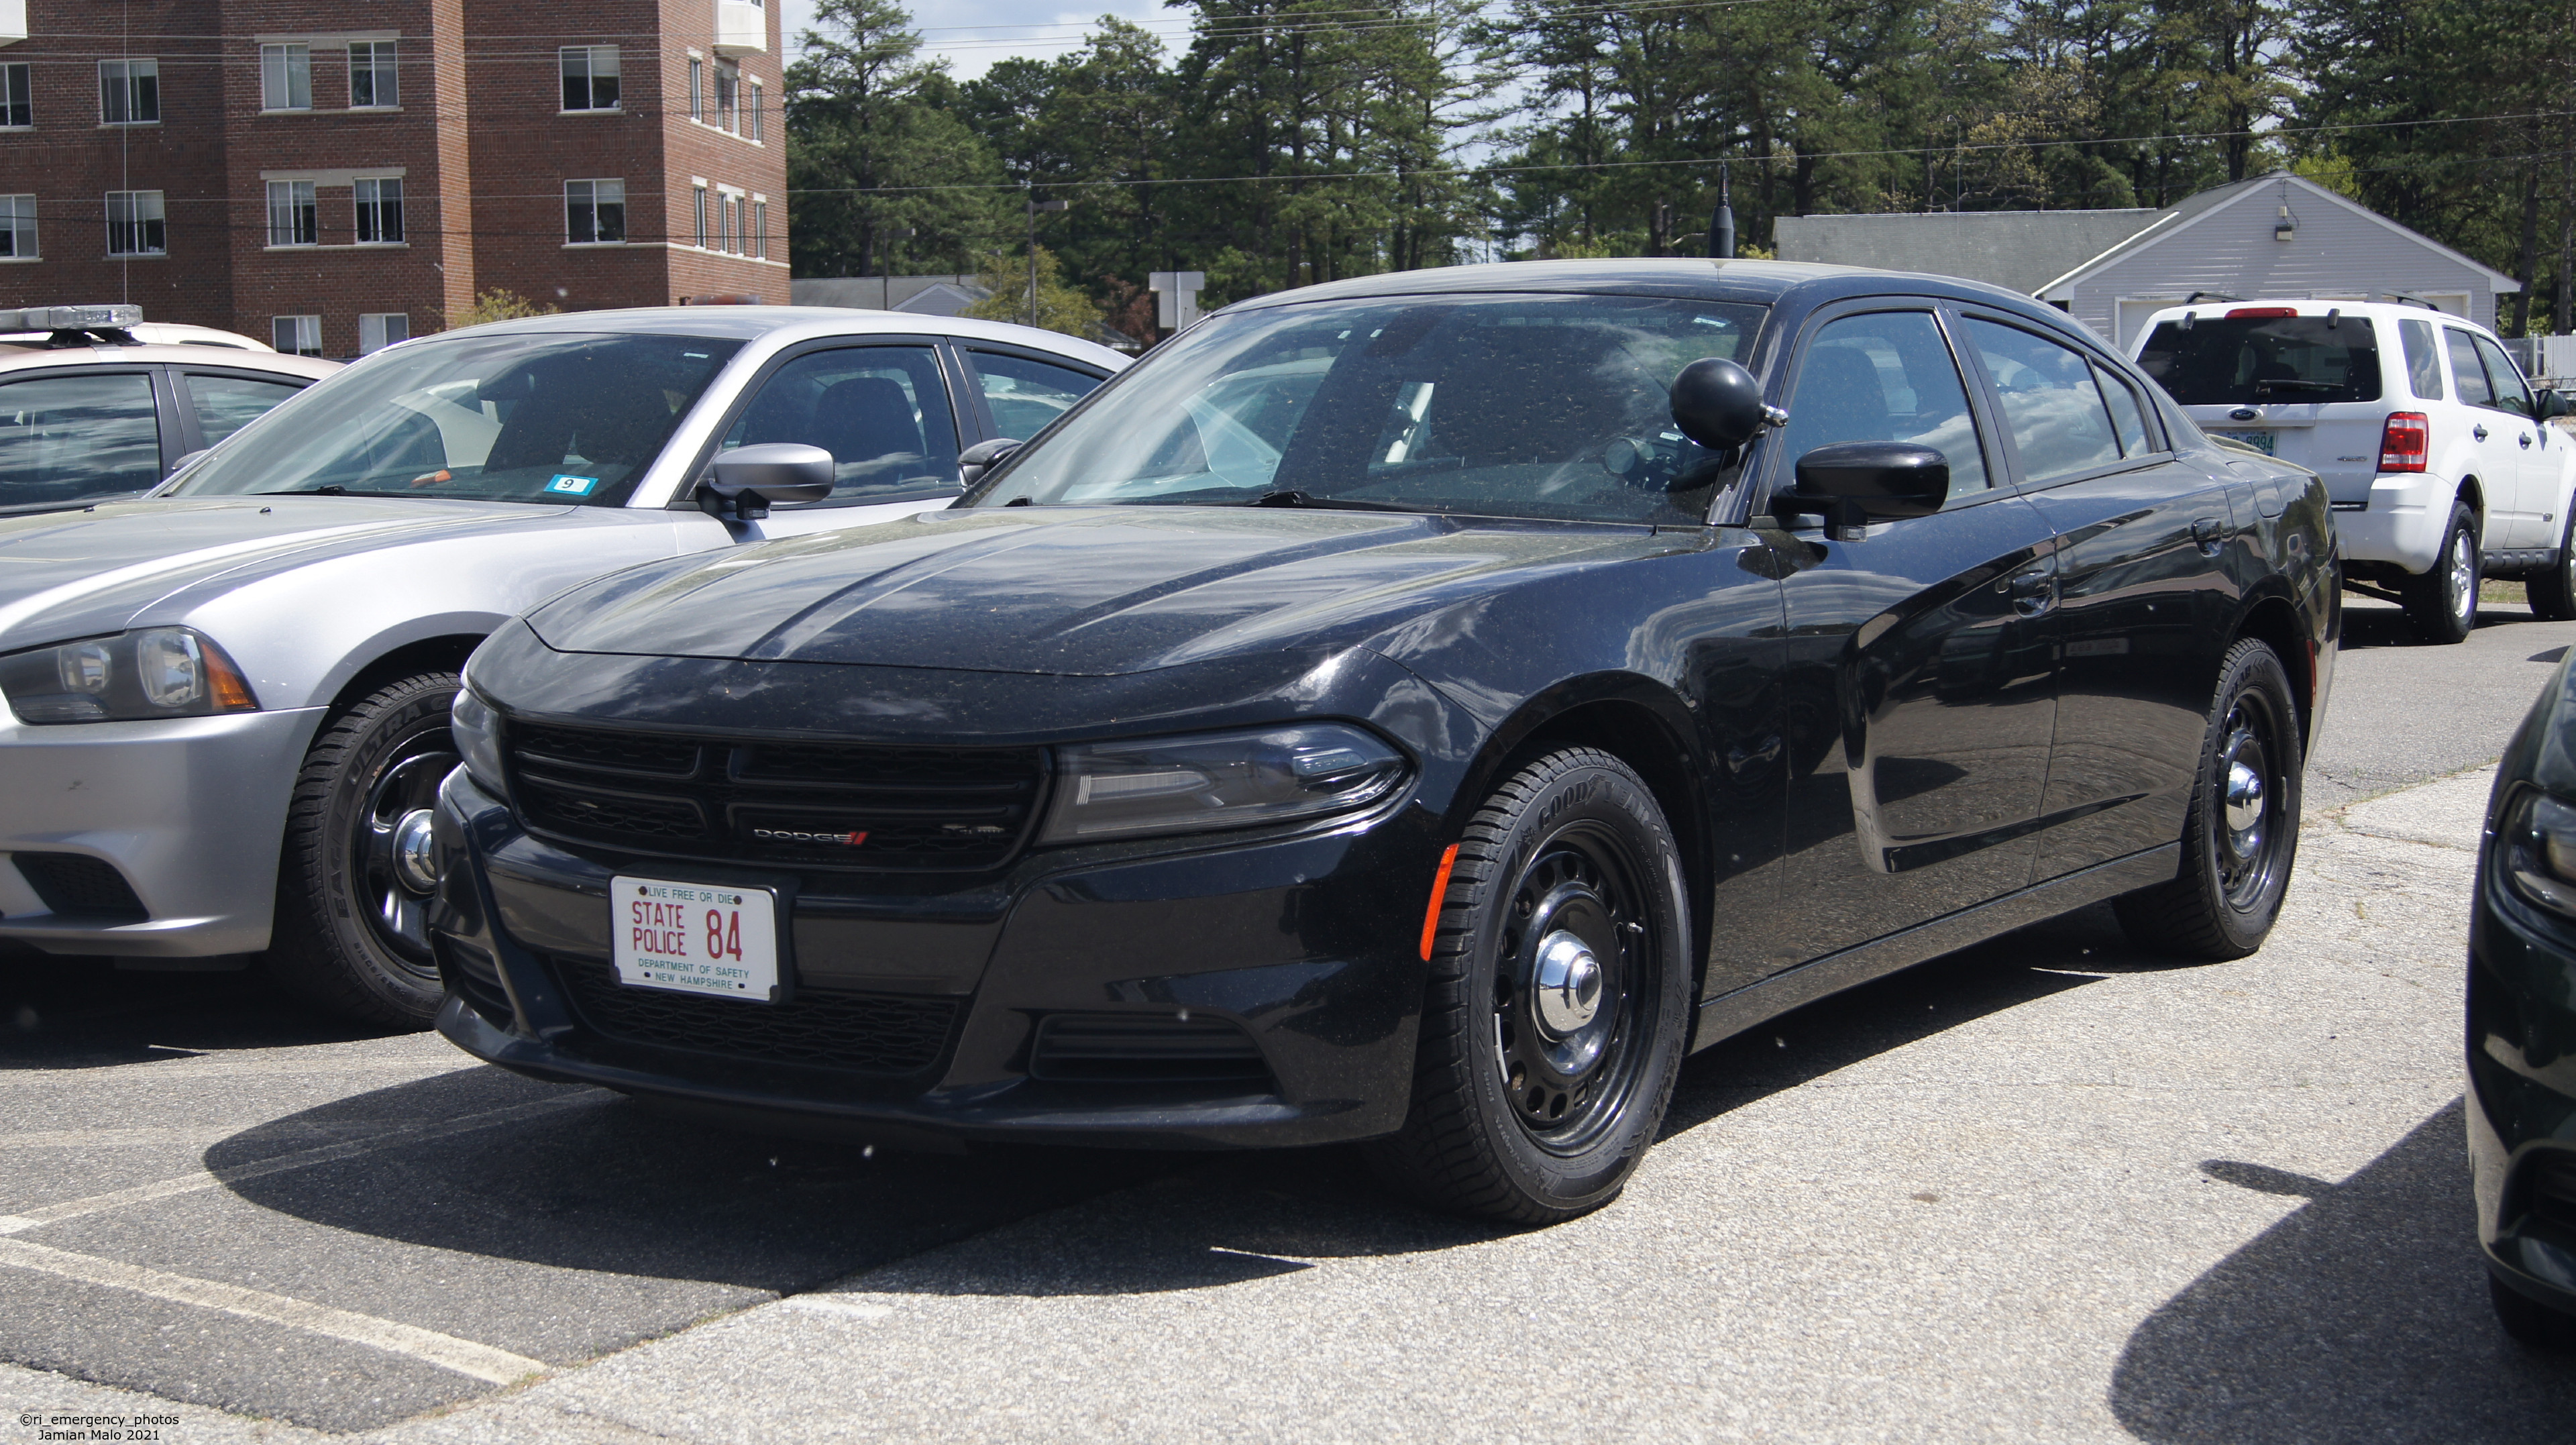 A photo  of New Hampshire State Police
            Cruiser 84, a 2017-2019 Dodge Charger             taken by Jamian Malo